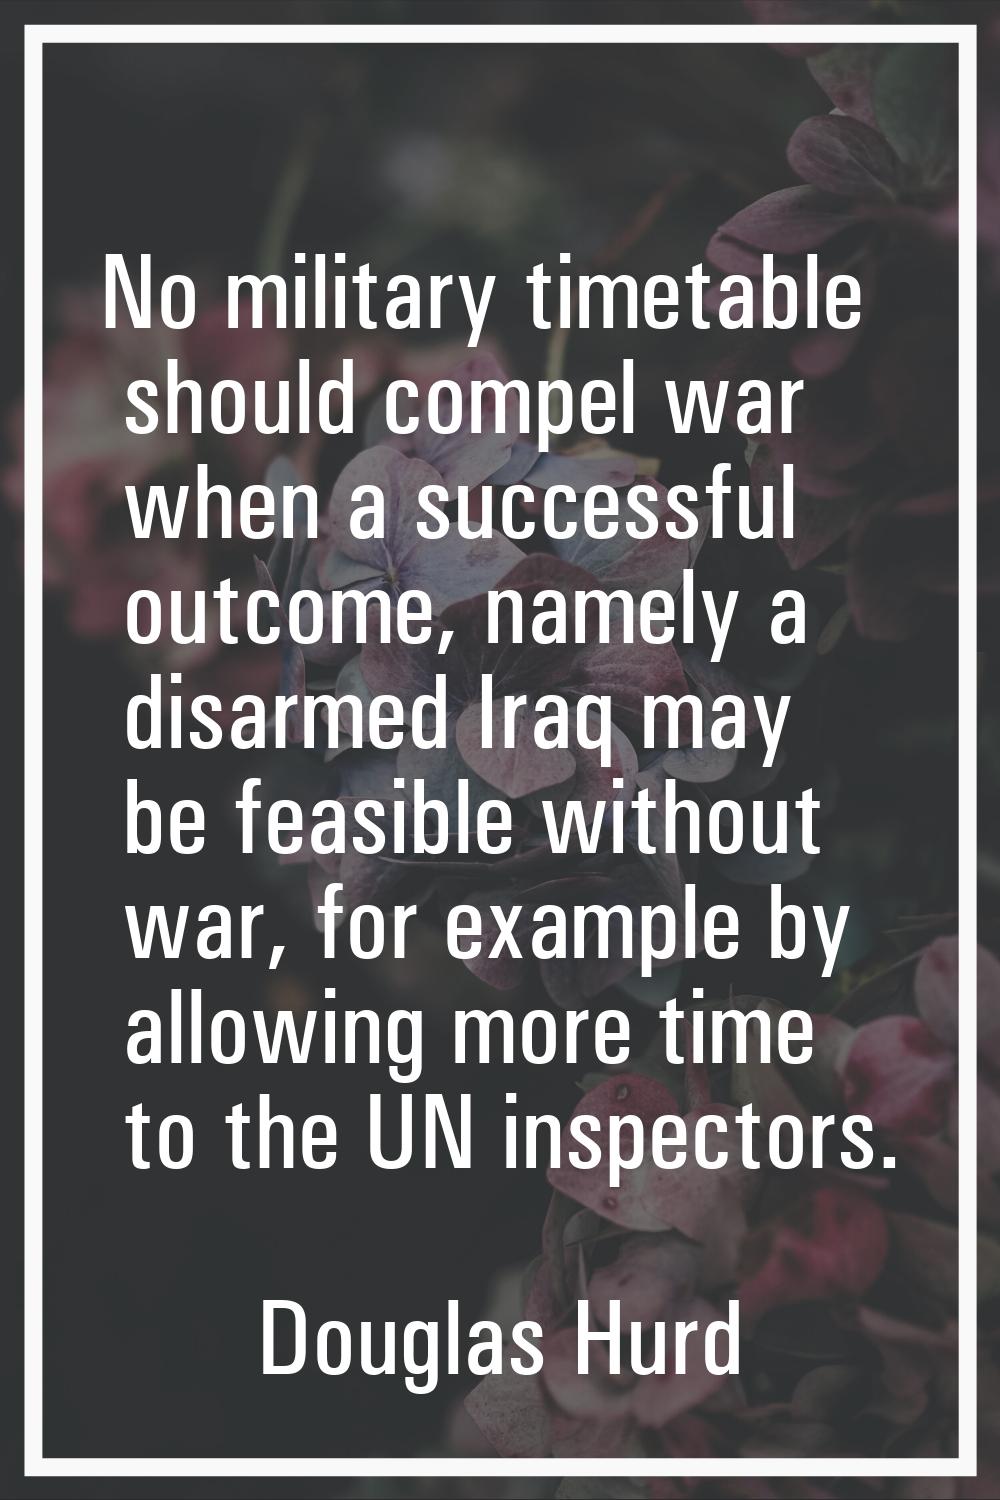 No military timetable should compel war when a successful outcome, namely a disarmed Iraq may be fe